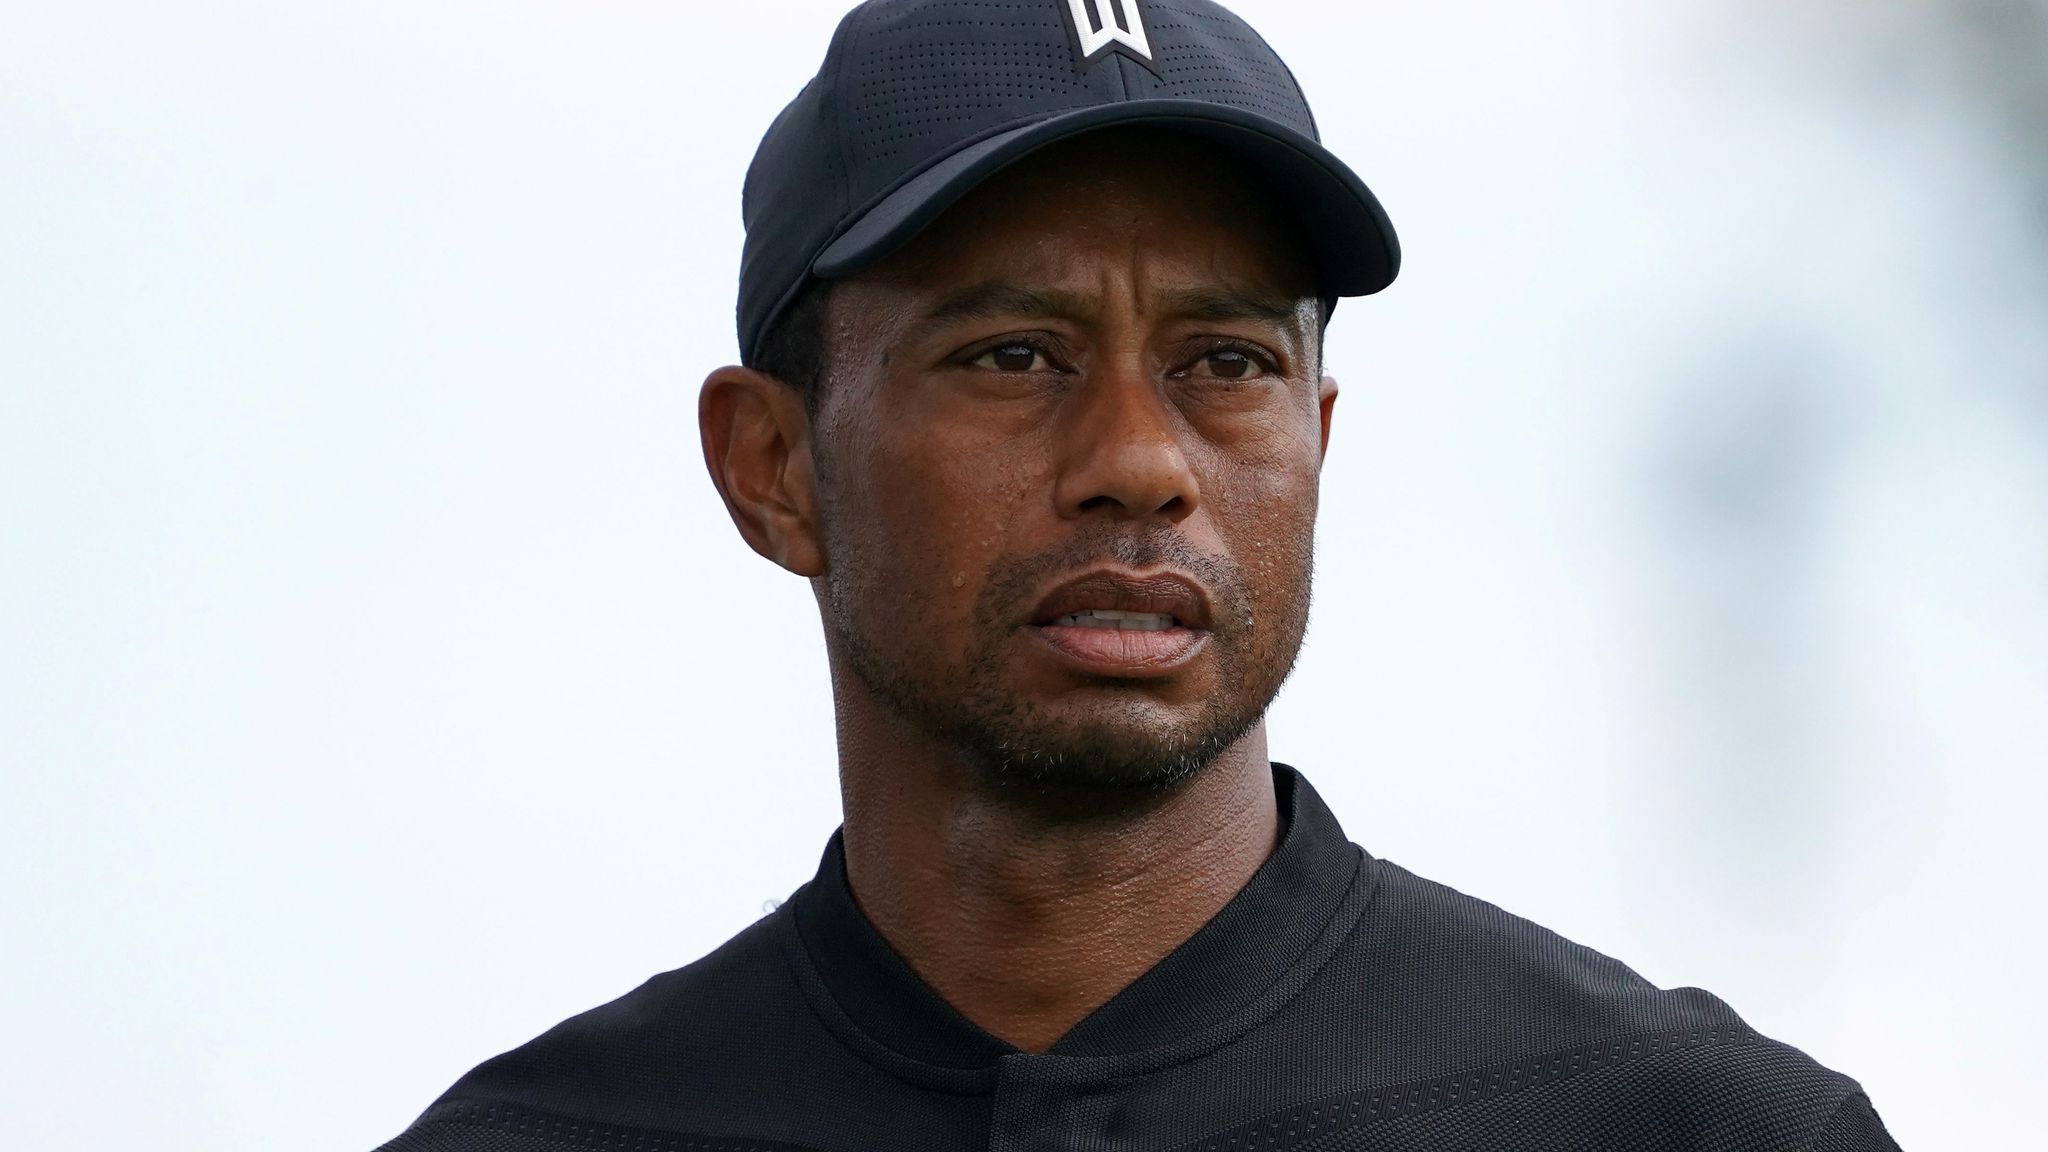 Us Open Tiger Woods Believes Winged Foot Could Be The Toughest Course In The World Golf News Sky Sports